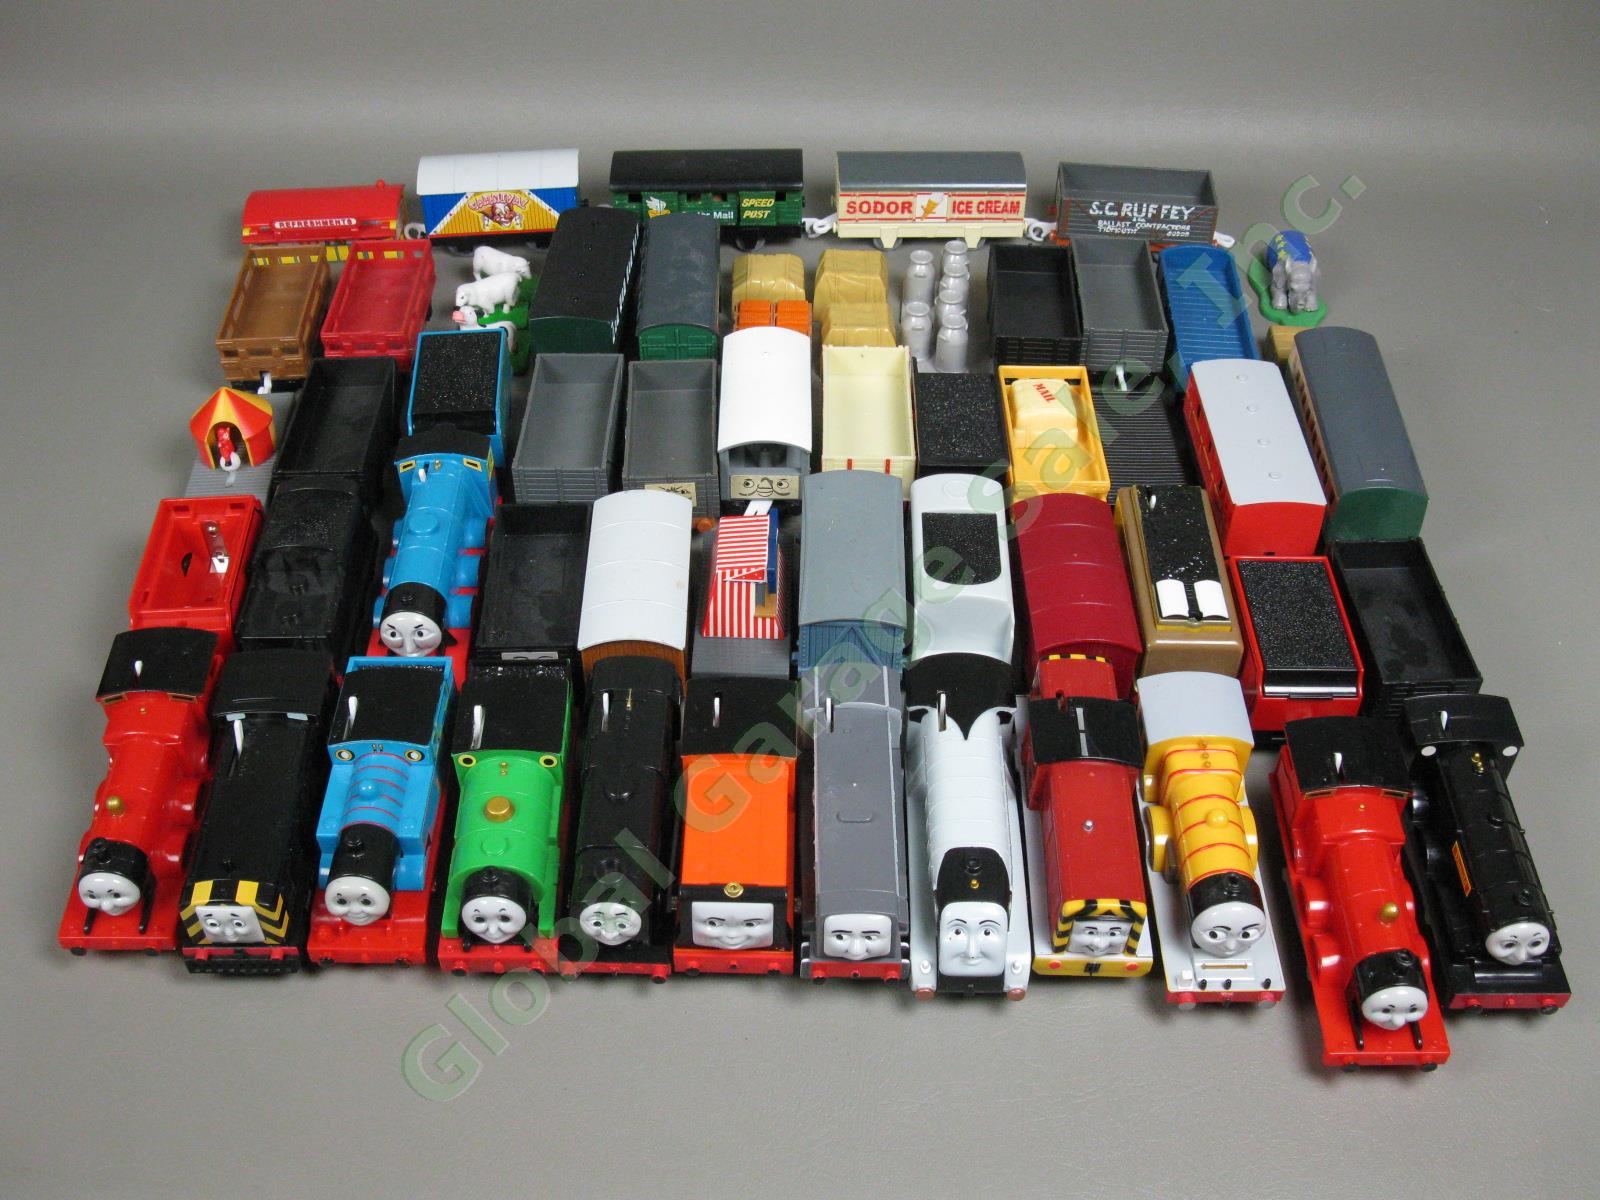 60 Thomas the Train Engine Motorized Engines + Boxcars + Accessories Lot Gullane